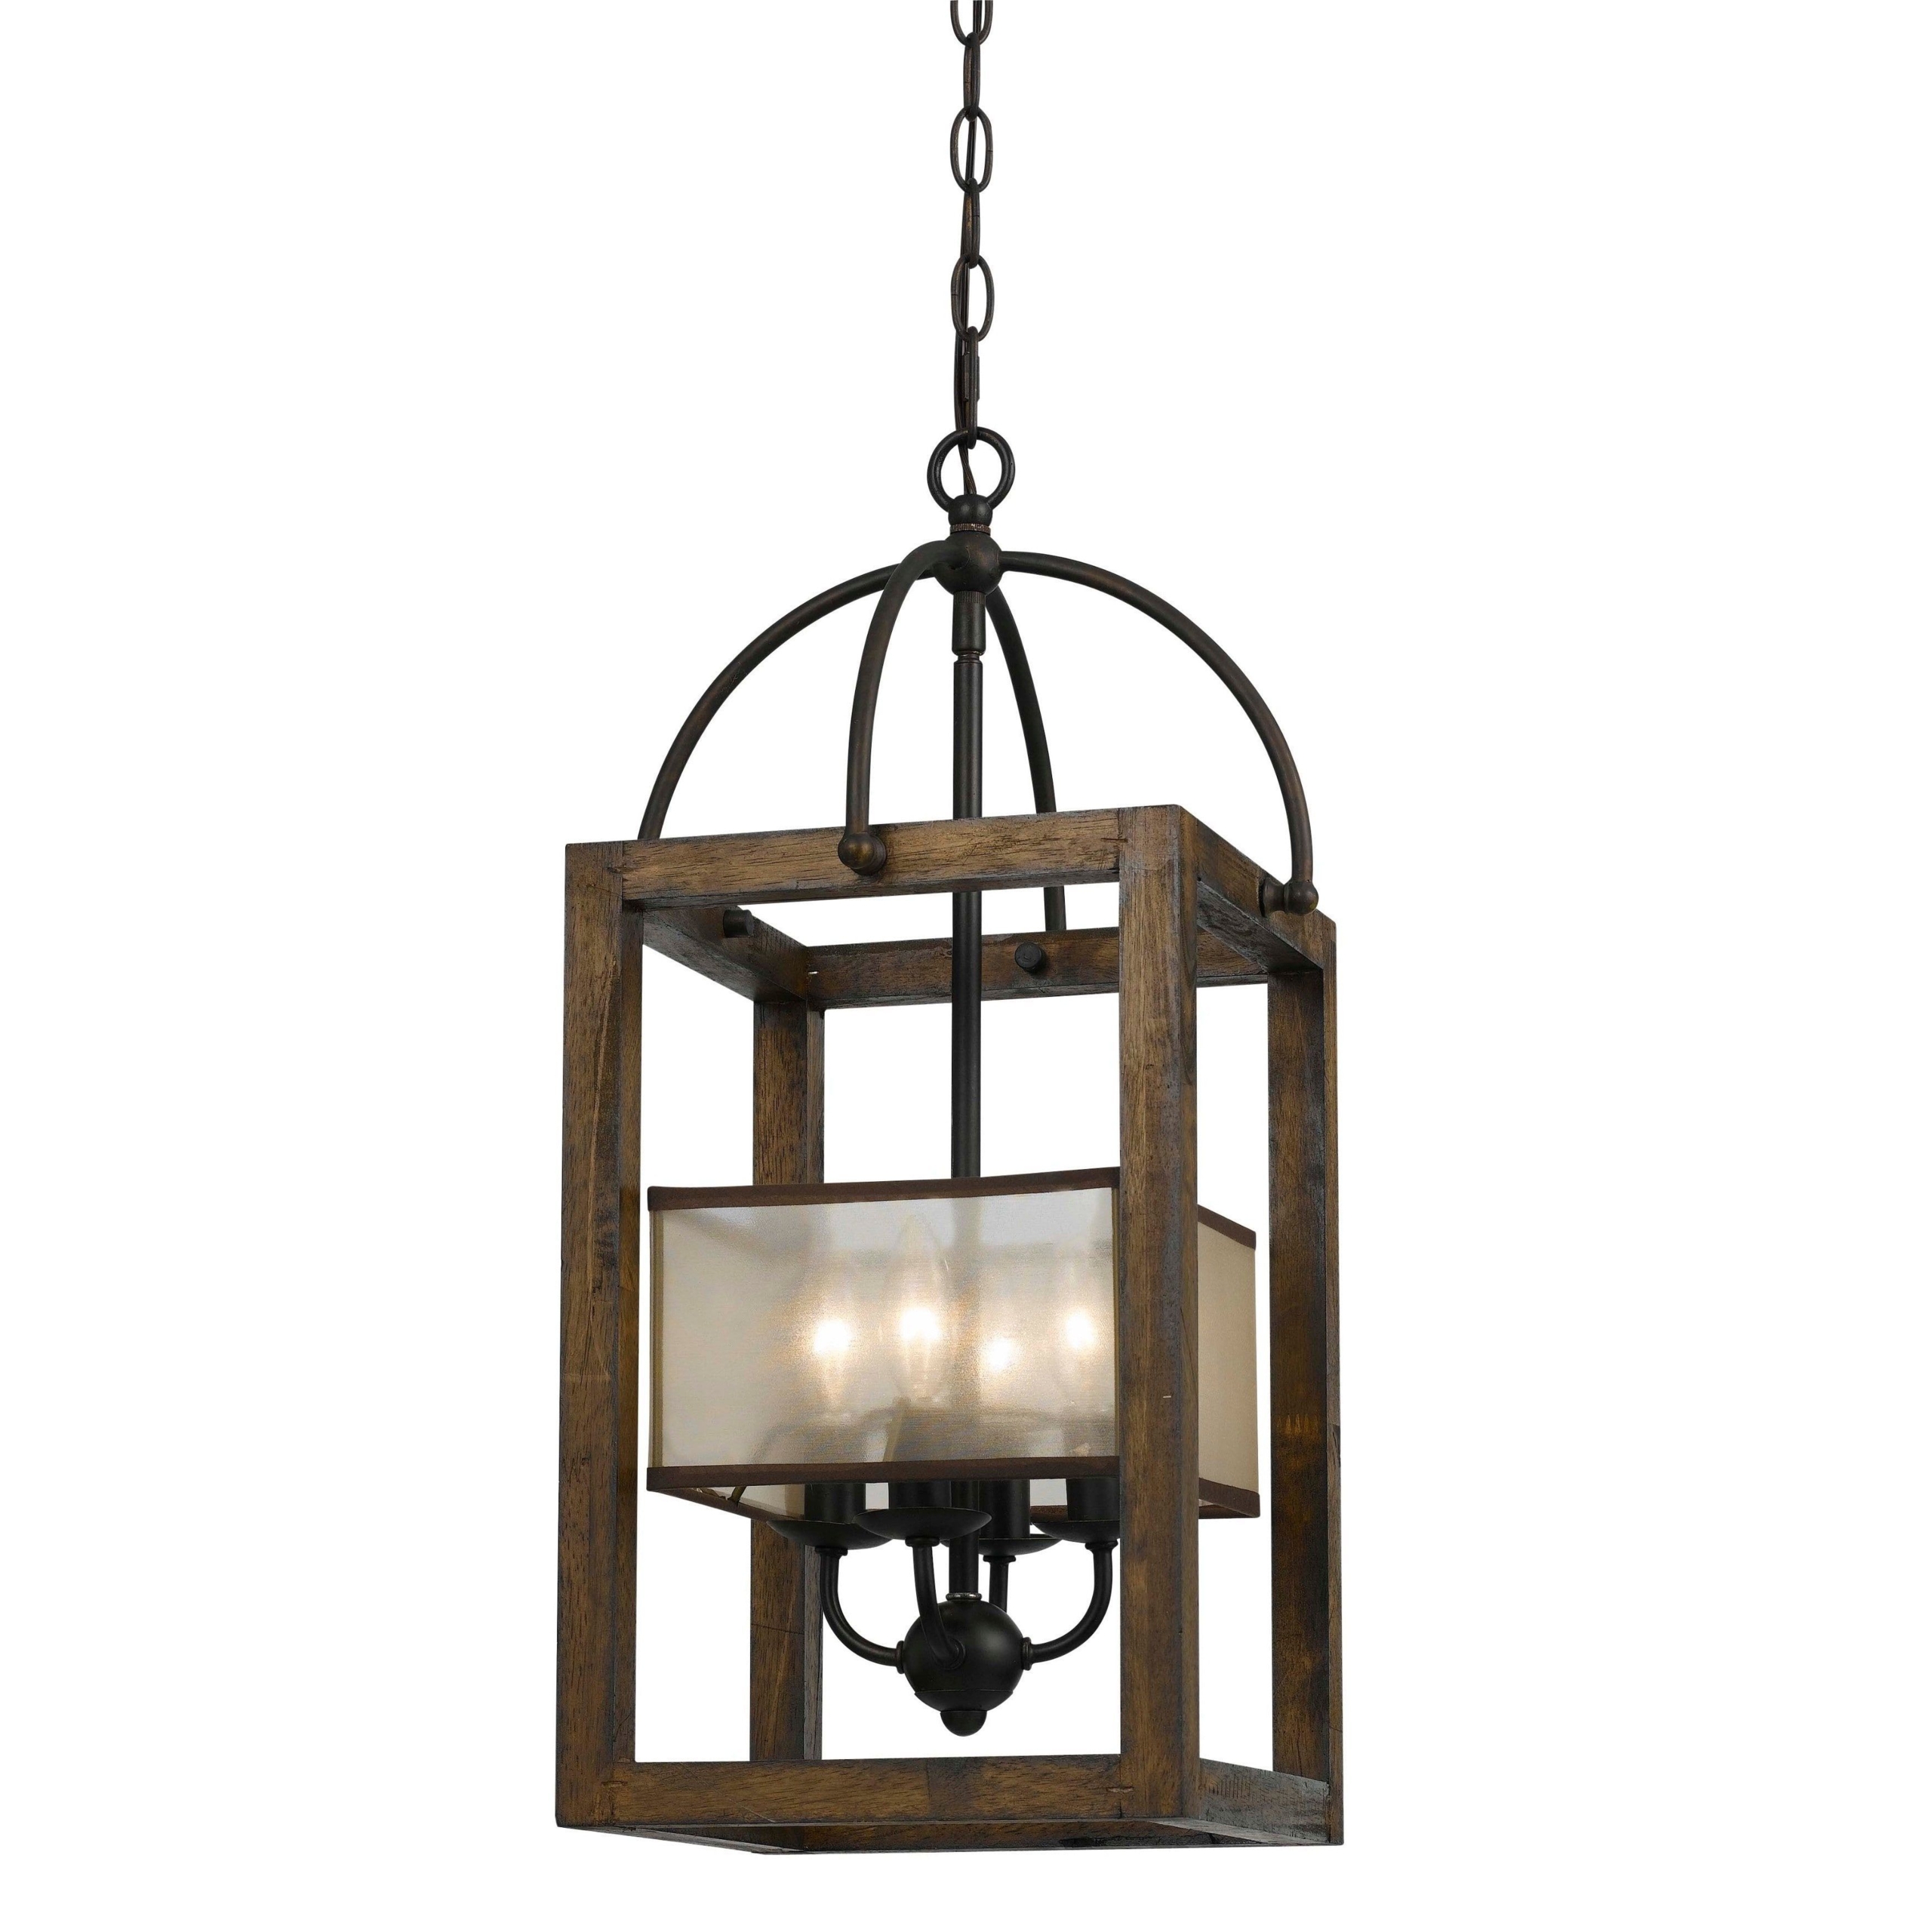 Cal Lighting FX-3536/4 Chandelier with Clear Seeded Glass Shades, Dark Bronze Finish